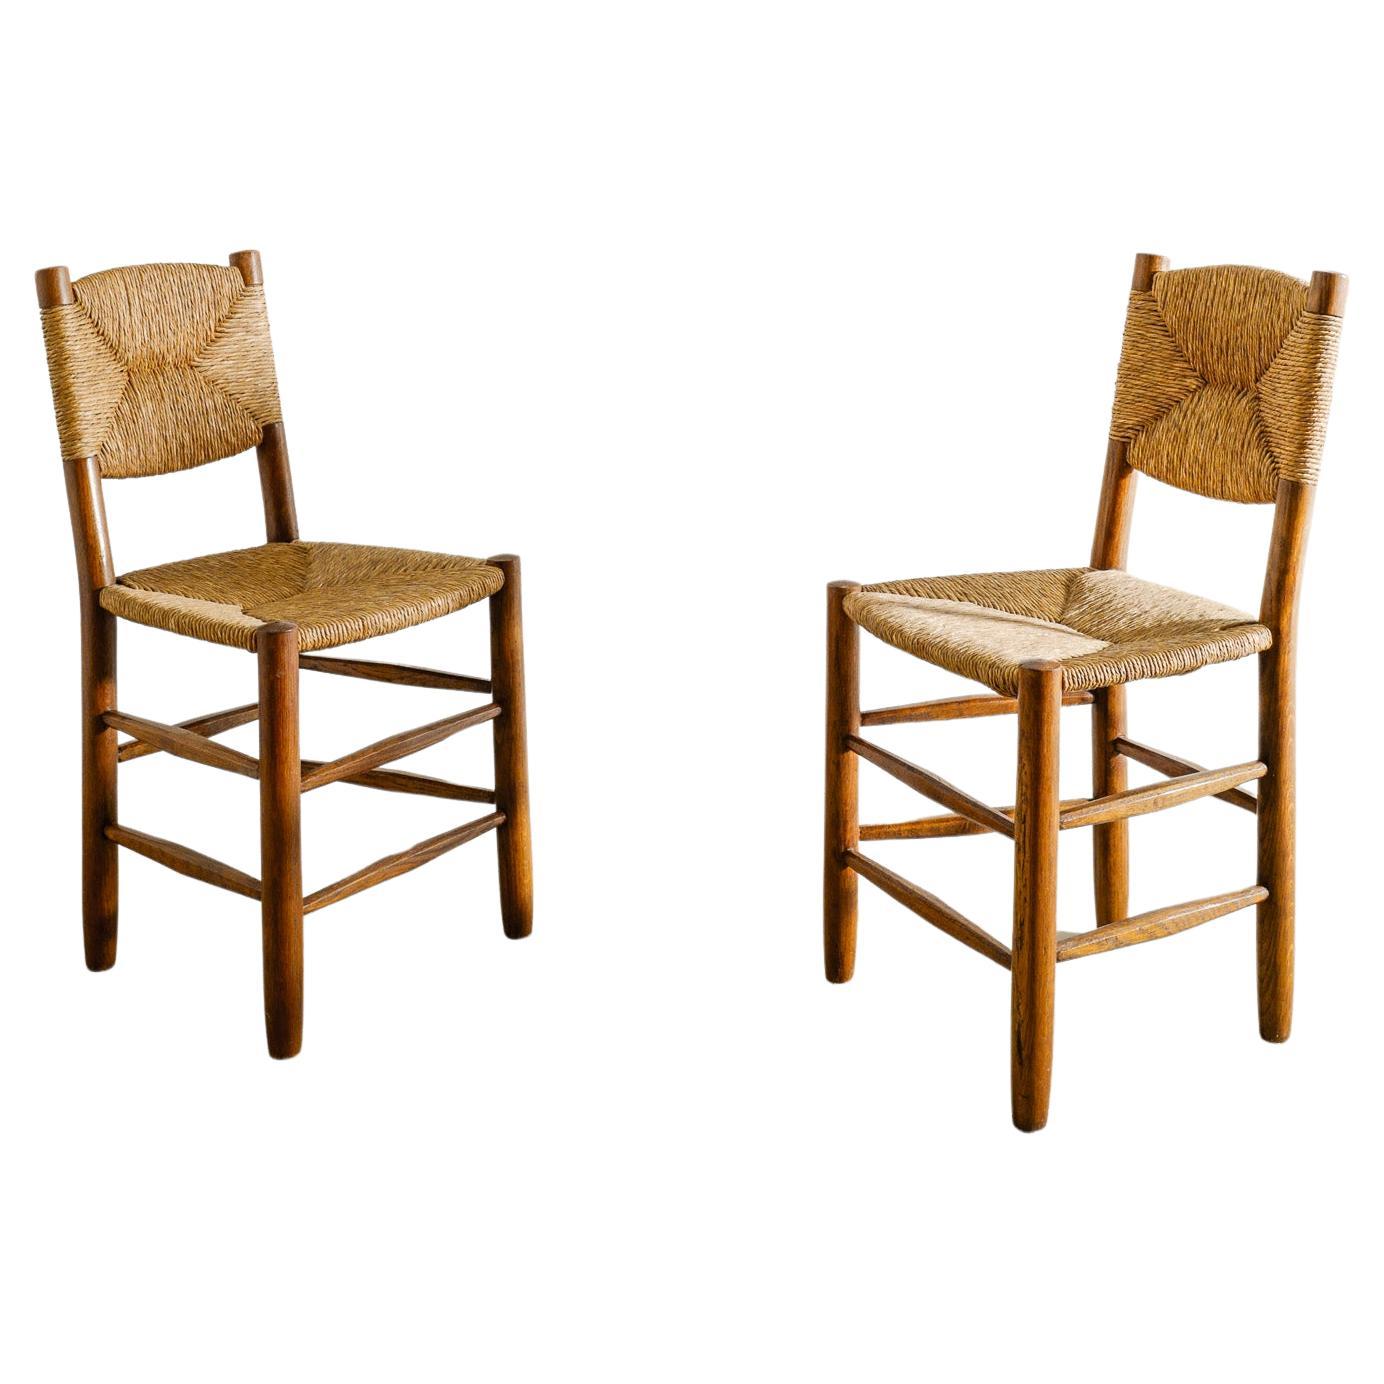 Pair of Mid Century Charlotte Perriand Meribel "N. 19" Dining Side Chairs, 1950s For Sale